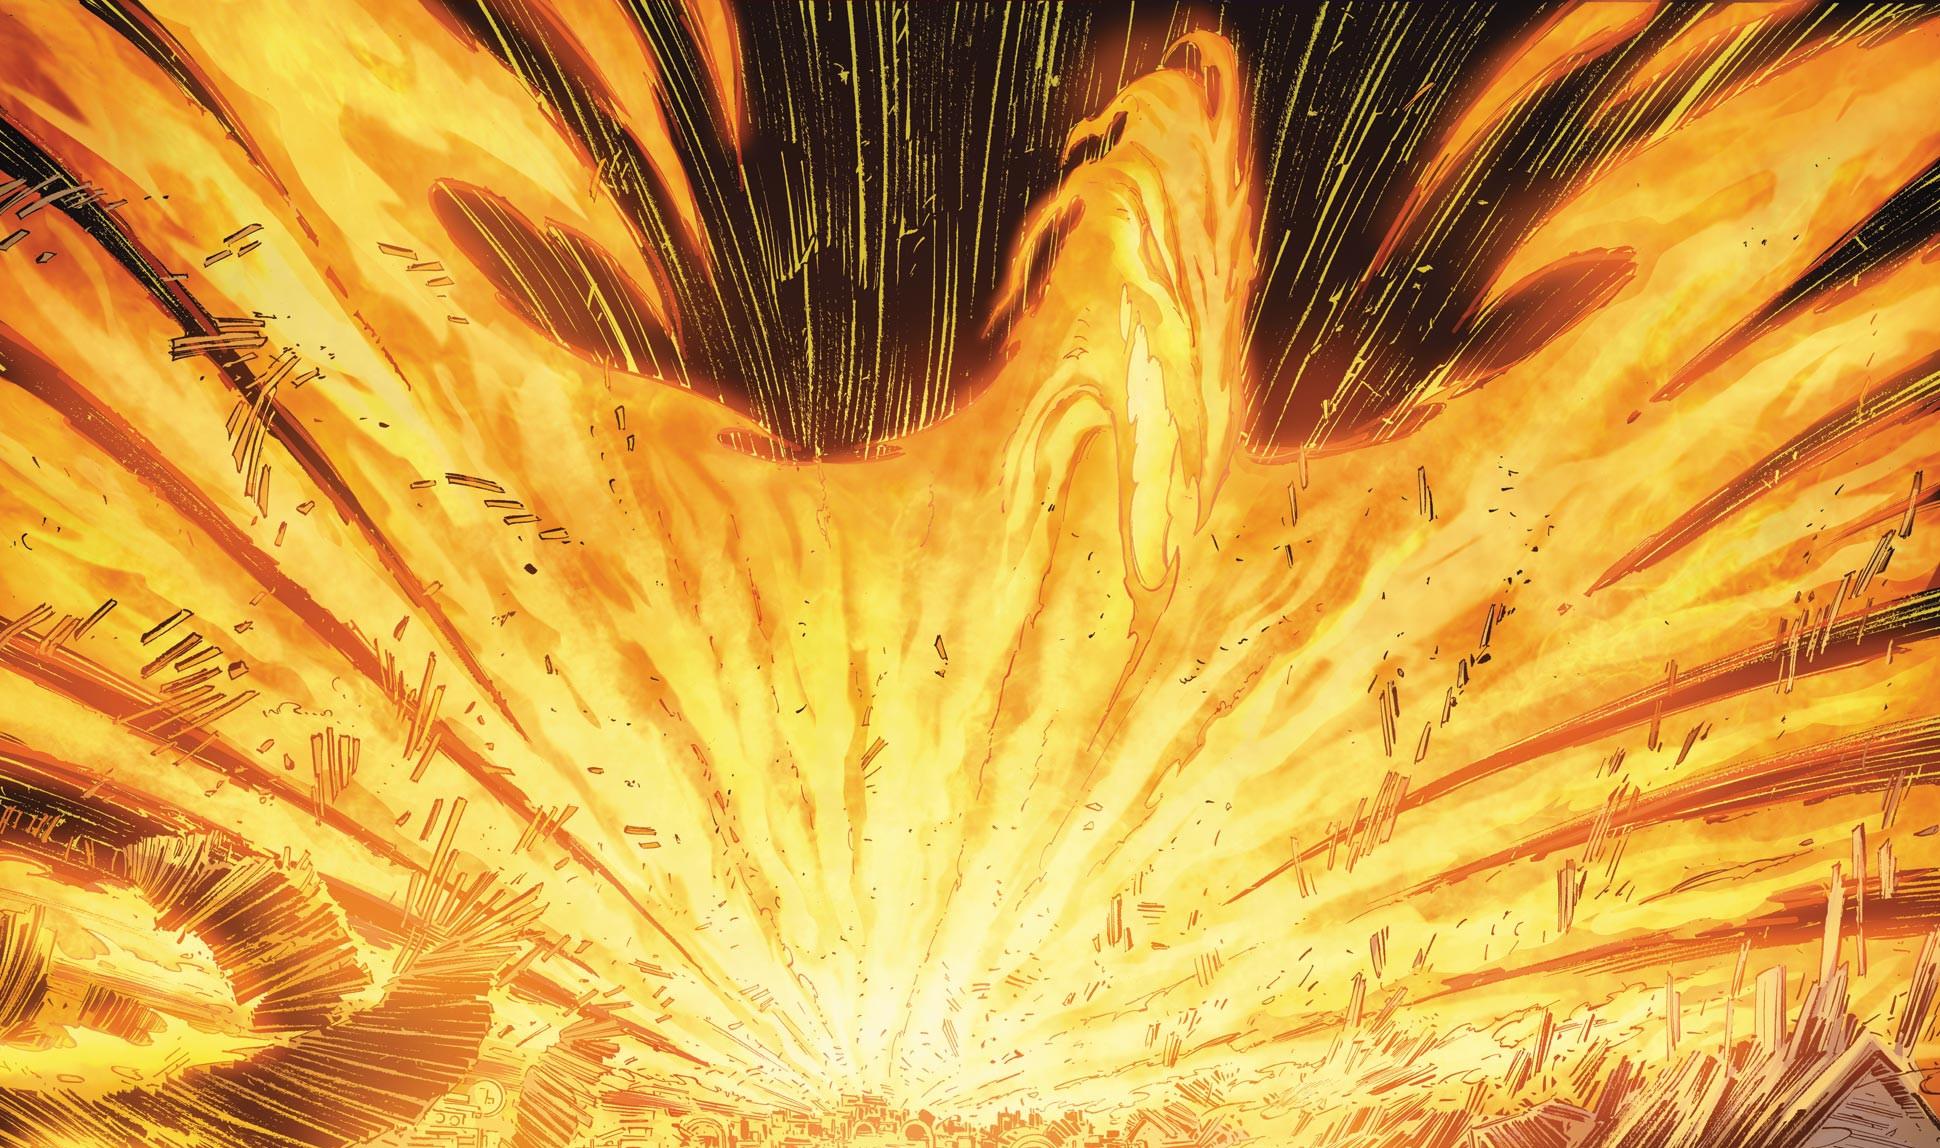 Phoenix Force The most feared being in the universe. Single handedly defeated Galactus himself and over powered even the mkraan crystal.